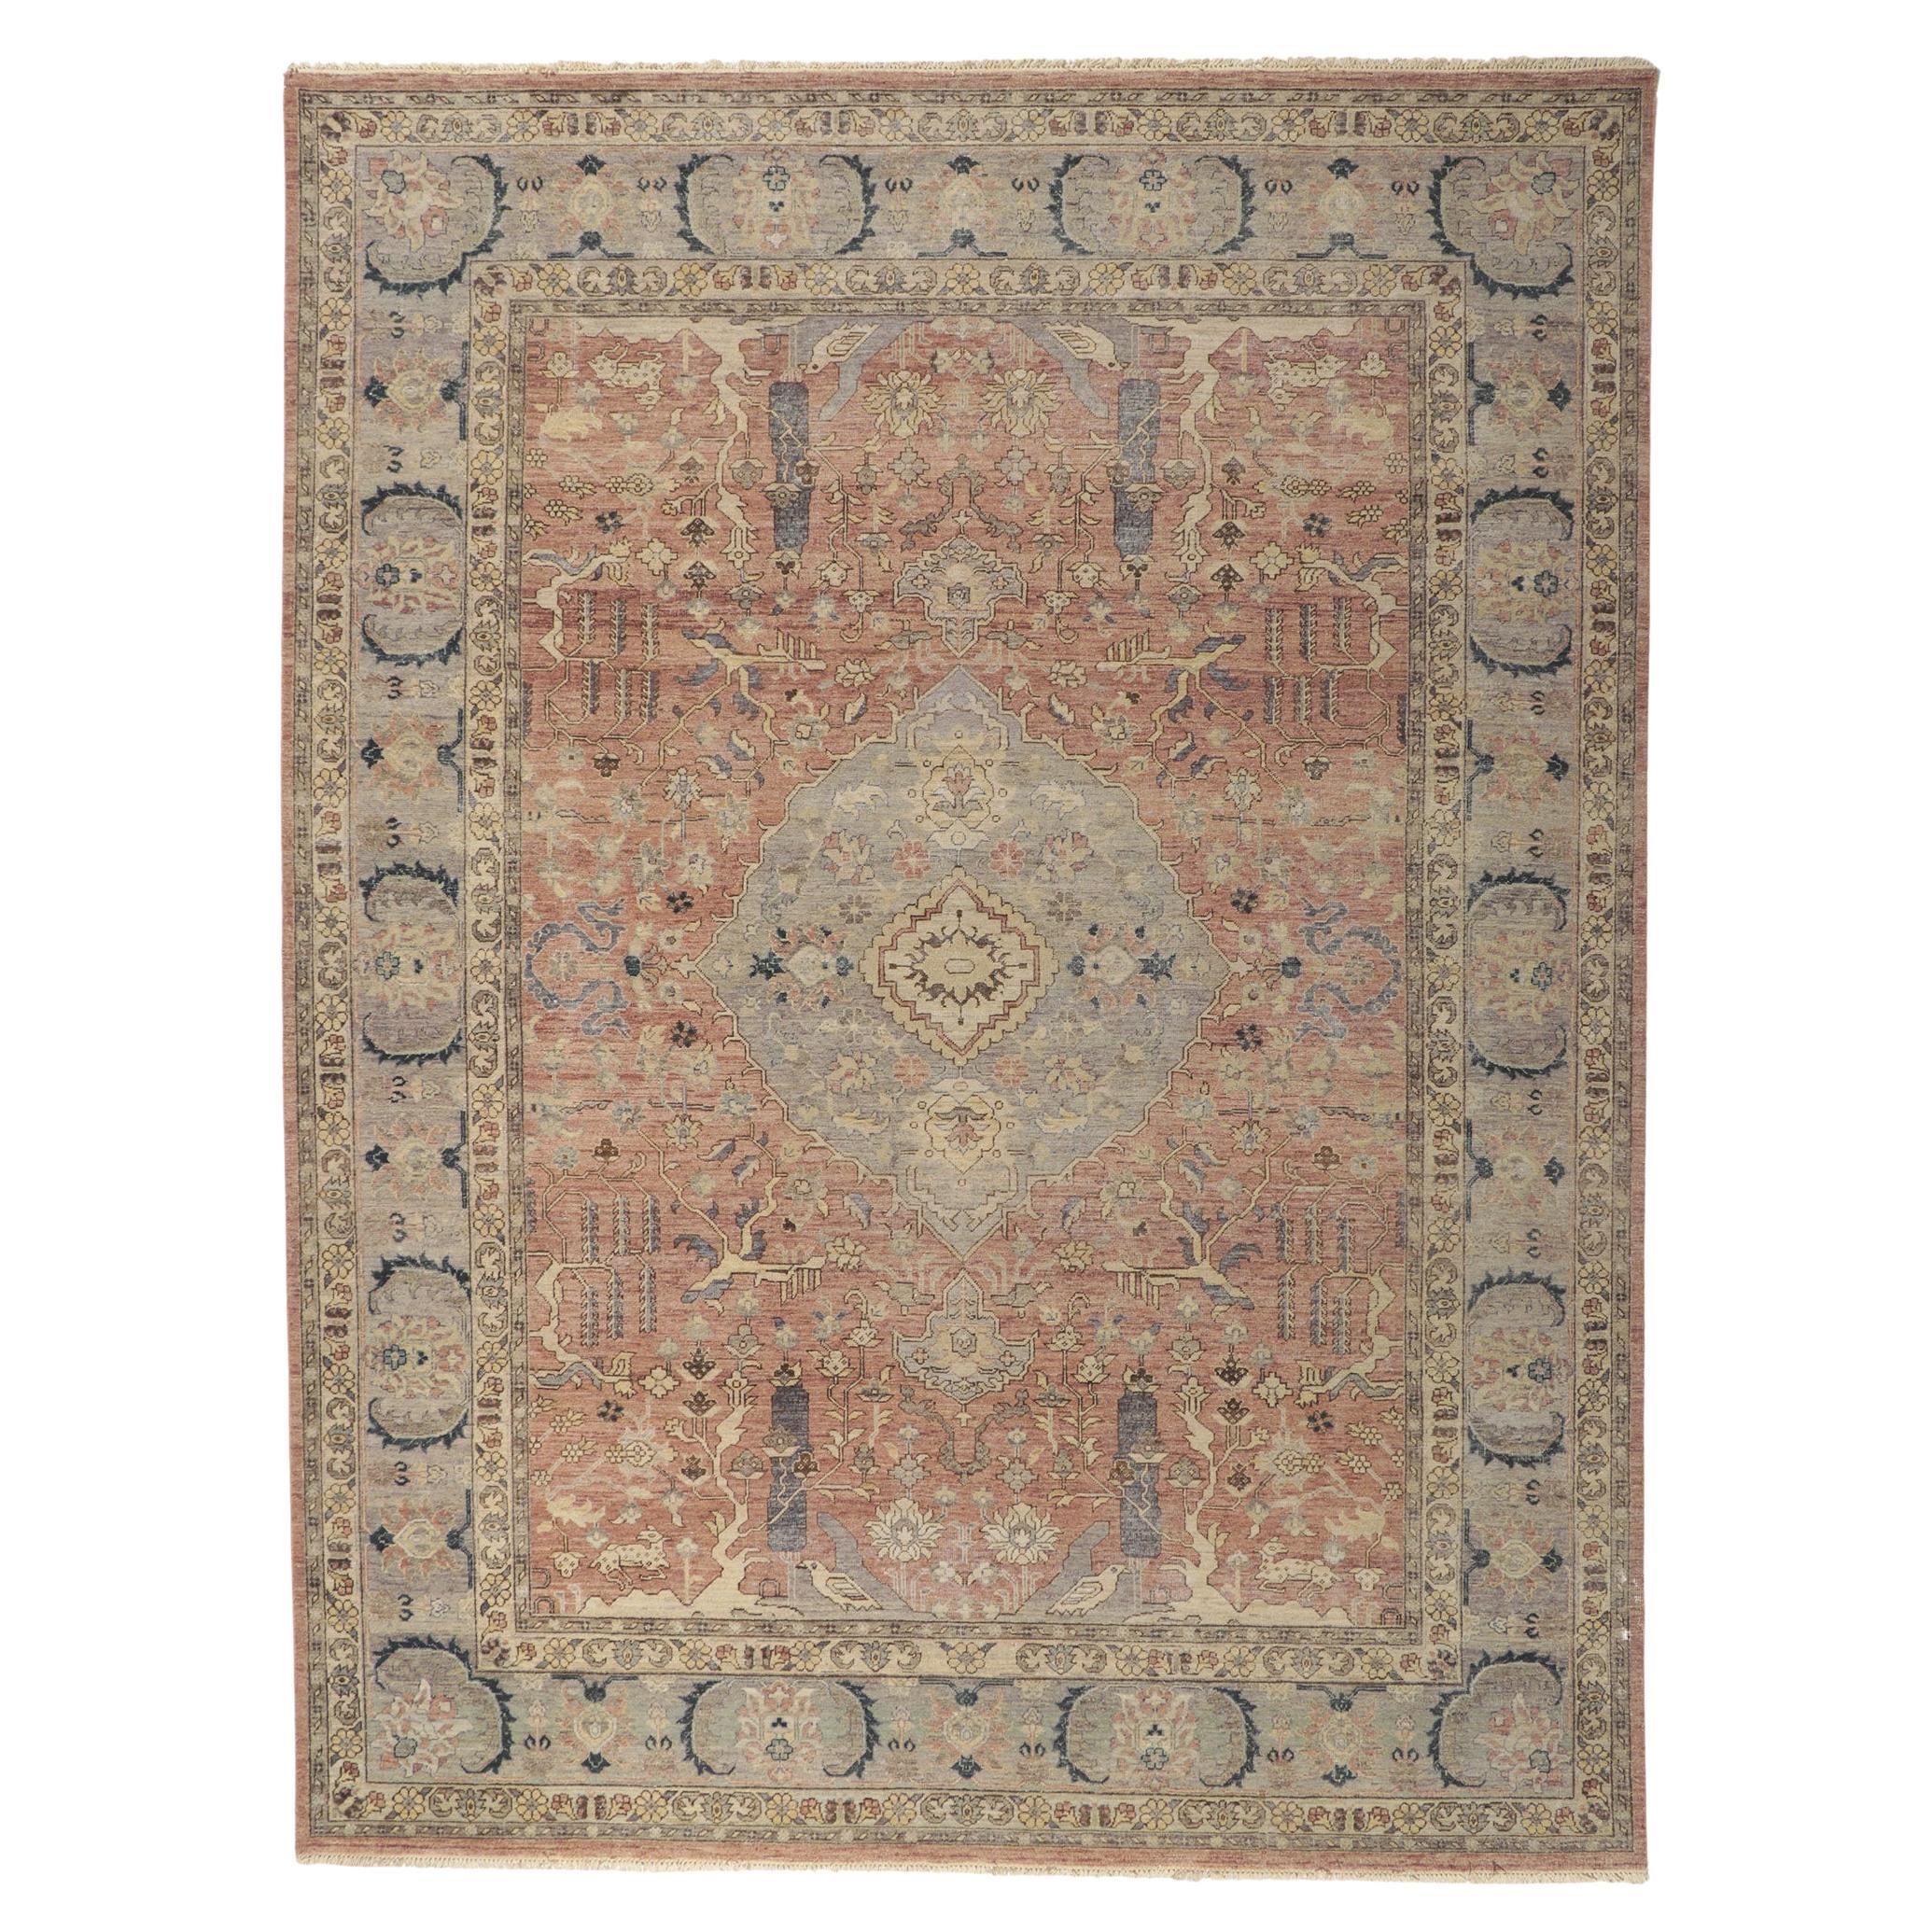 New Vintage-Style Distressed Rug with Soft Earth-Tone Colors